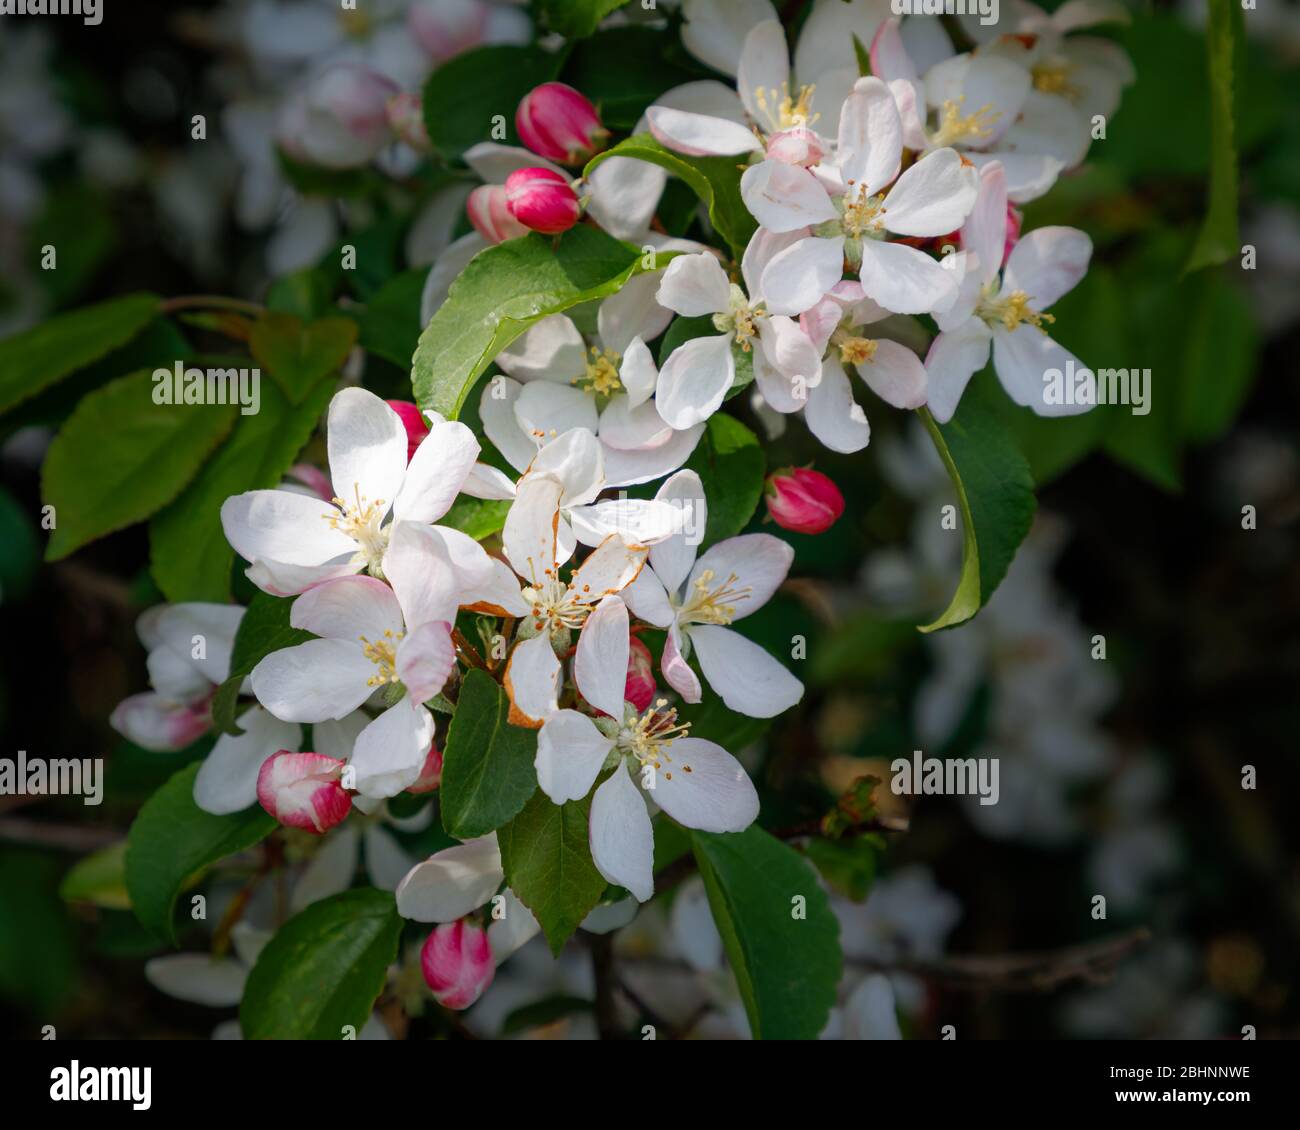 Close-up of white blossom of a crab apple tree (Malus sylvestris) with pink buds and green leaves. Stock Photo